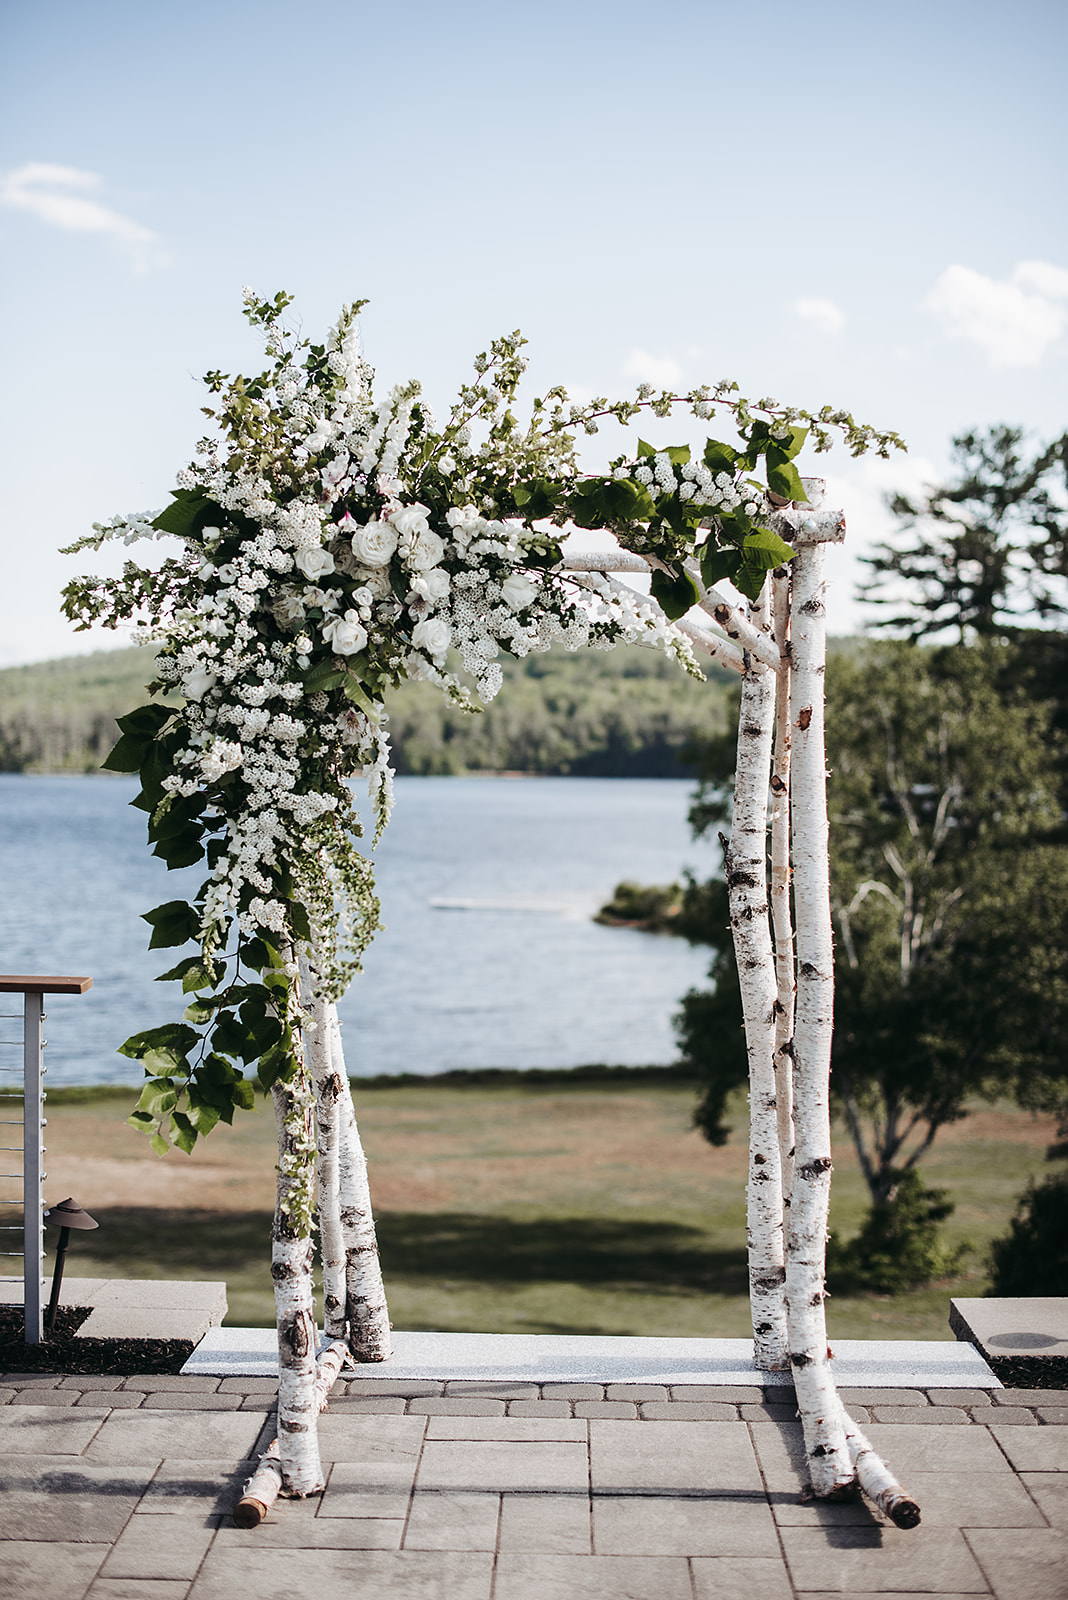 Nothing like a perfect June wedding at the beautiful Bear Mountain Inn. Breathtaking views and unforgettable moments.